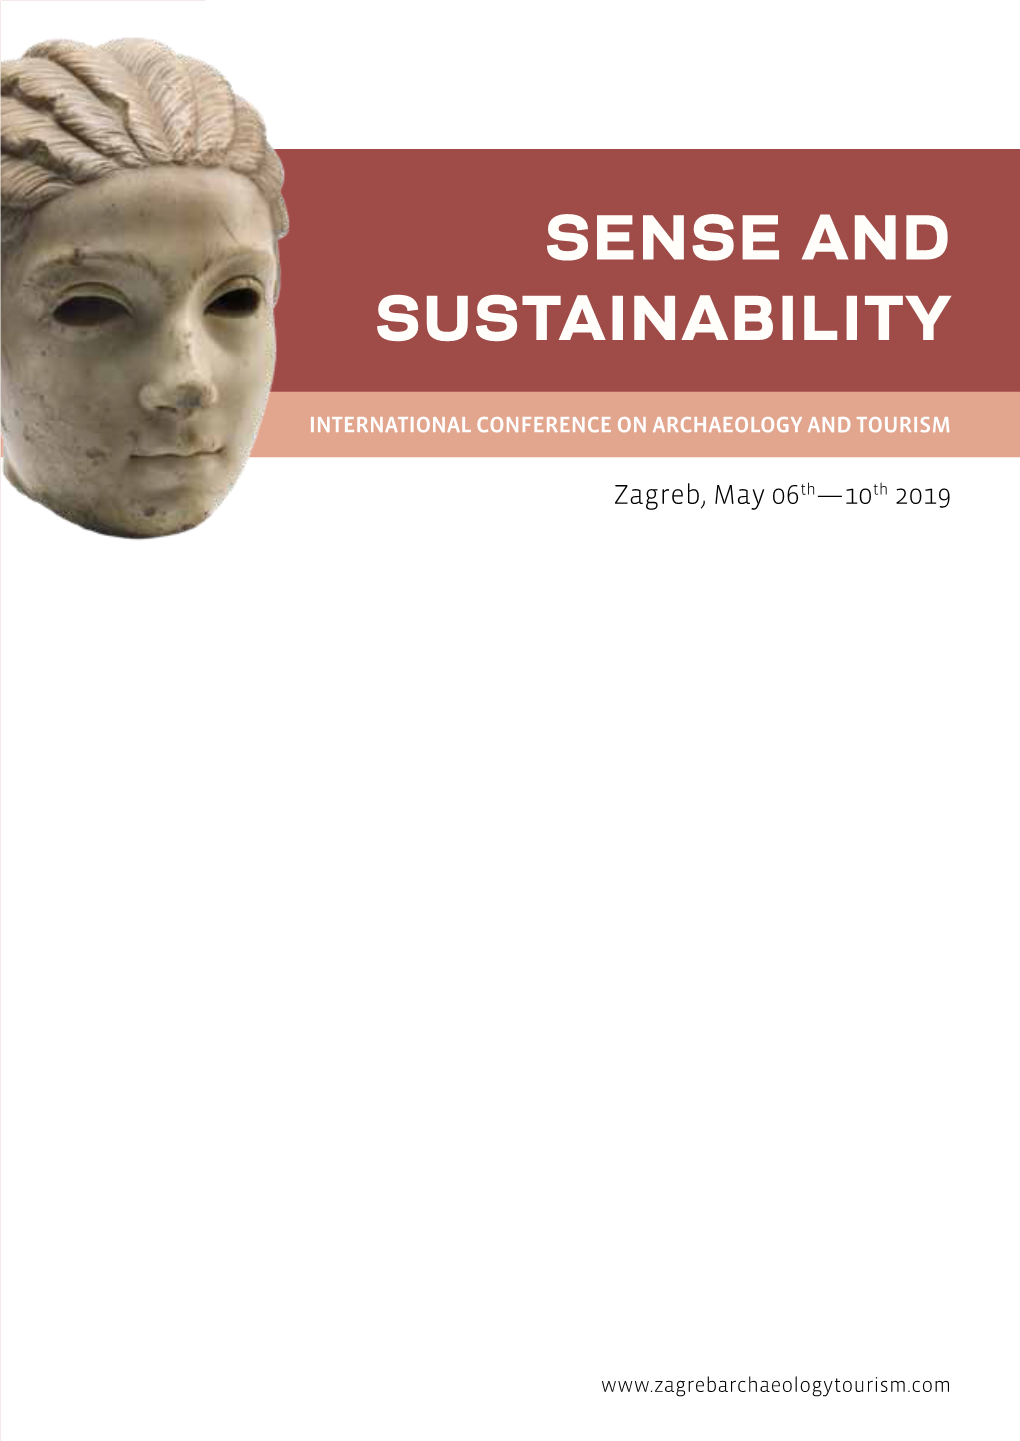 Sense and Sustainability International Conference on Archaeology and Tourism Zagreb, May, 06Th—10Th 2019